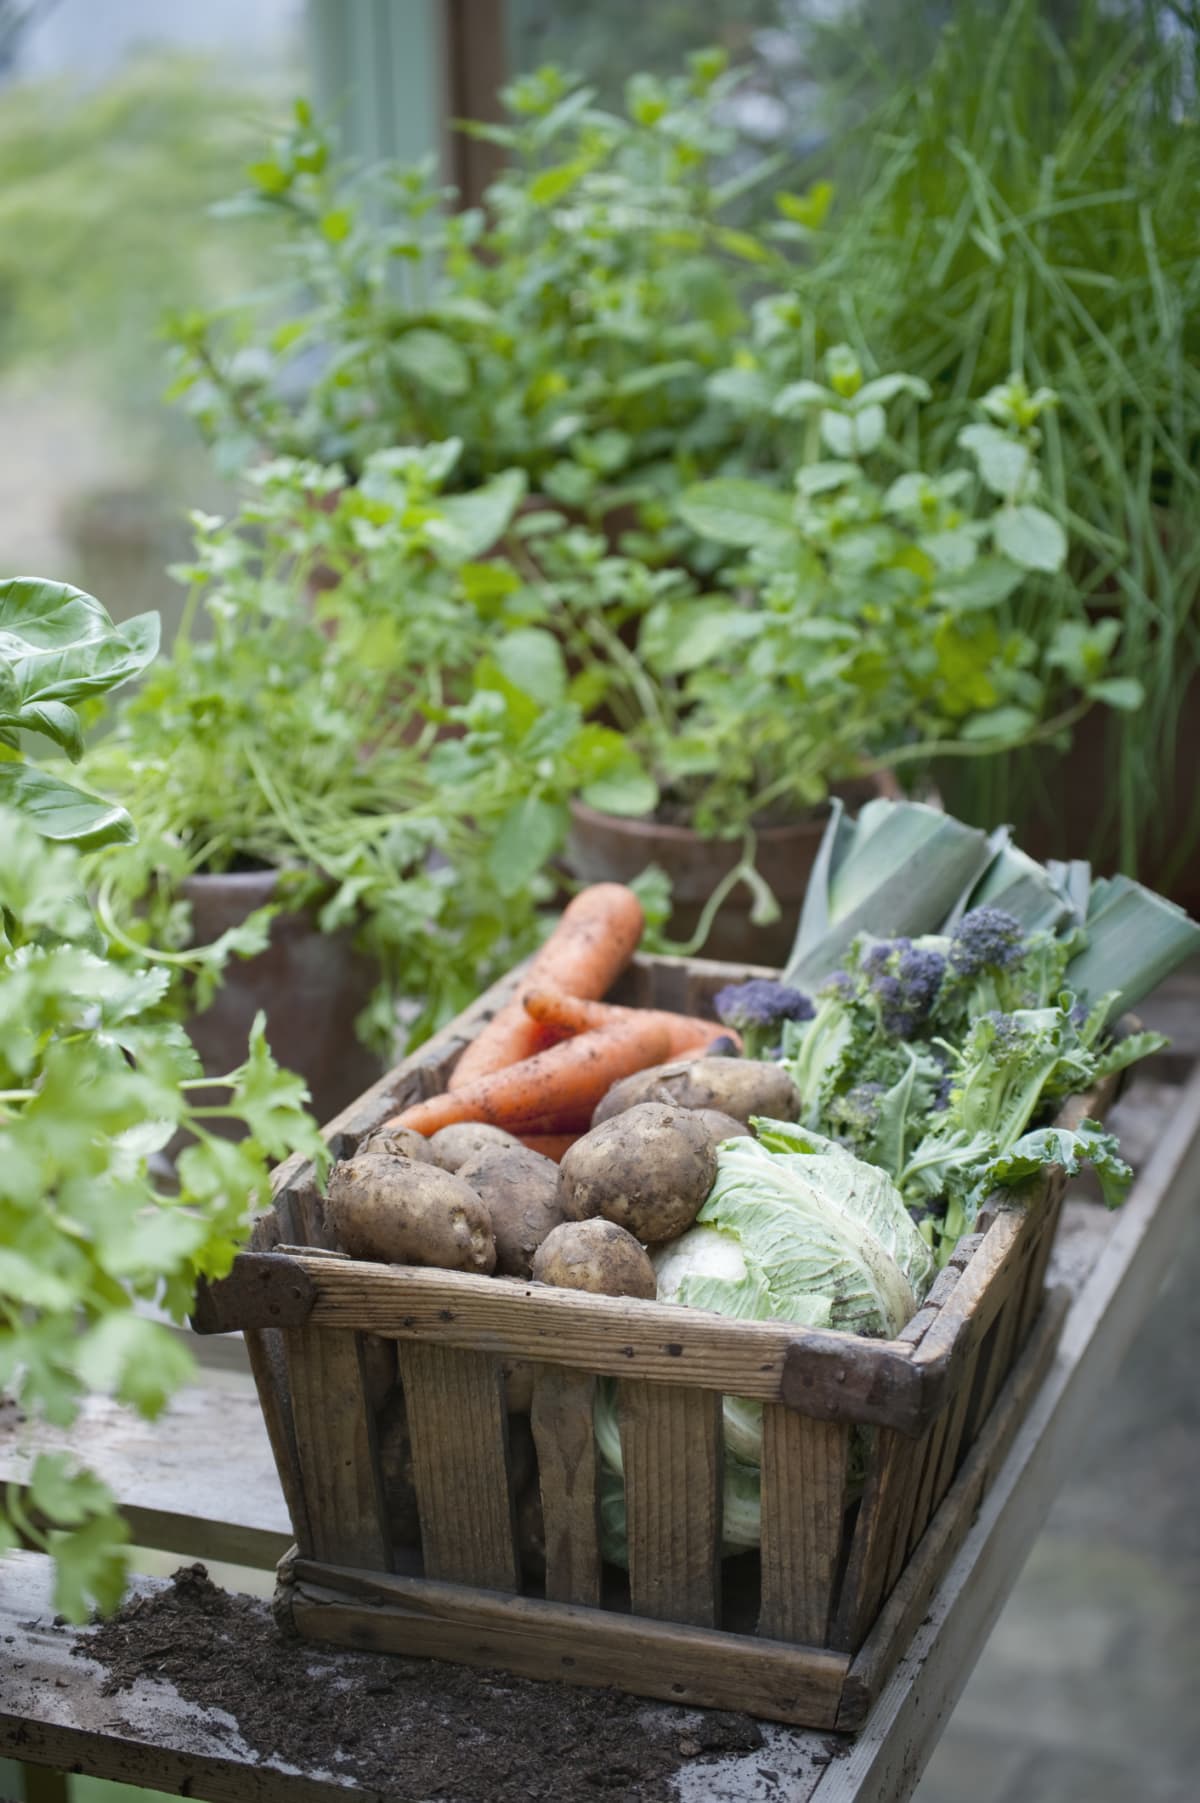 Wooden crate of fresh vegetables such as carrots and potatoes